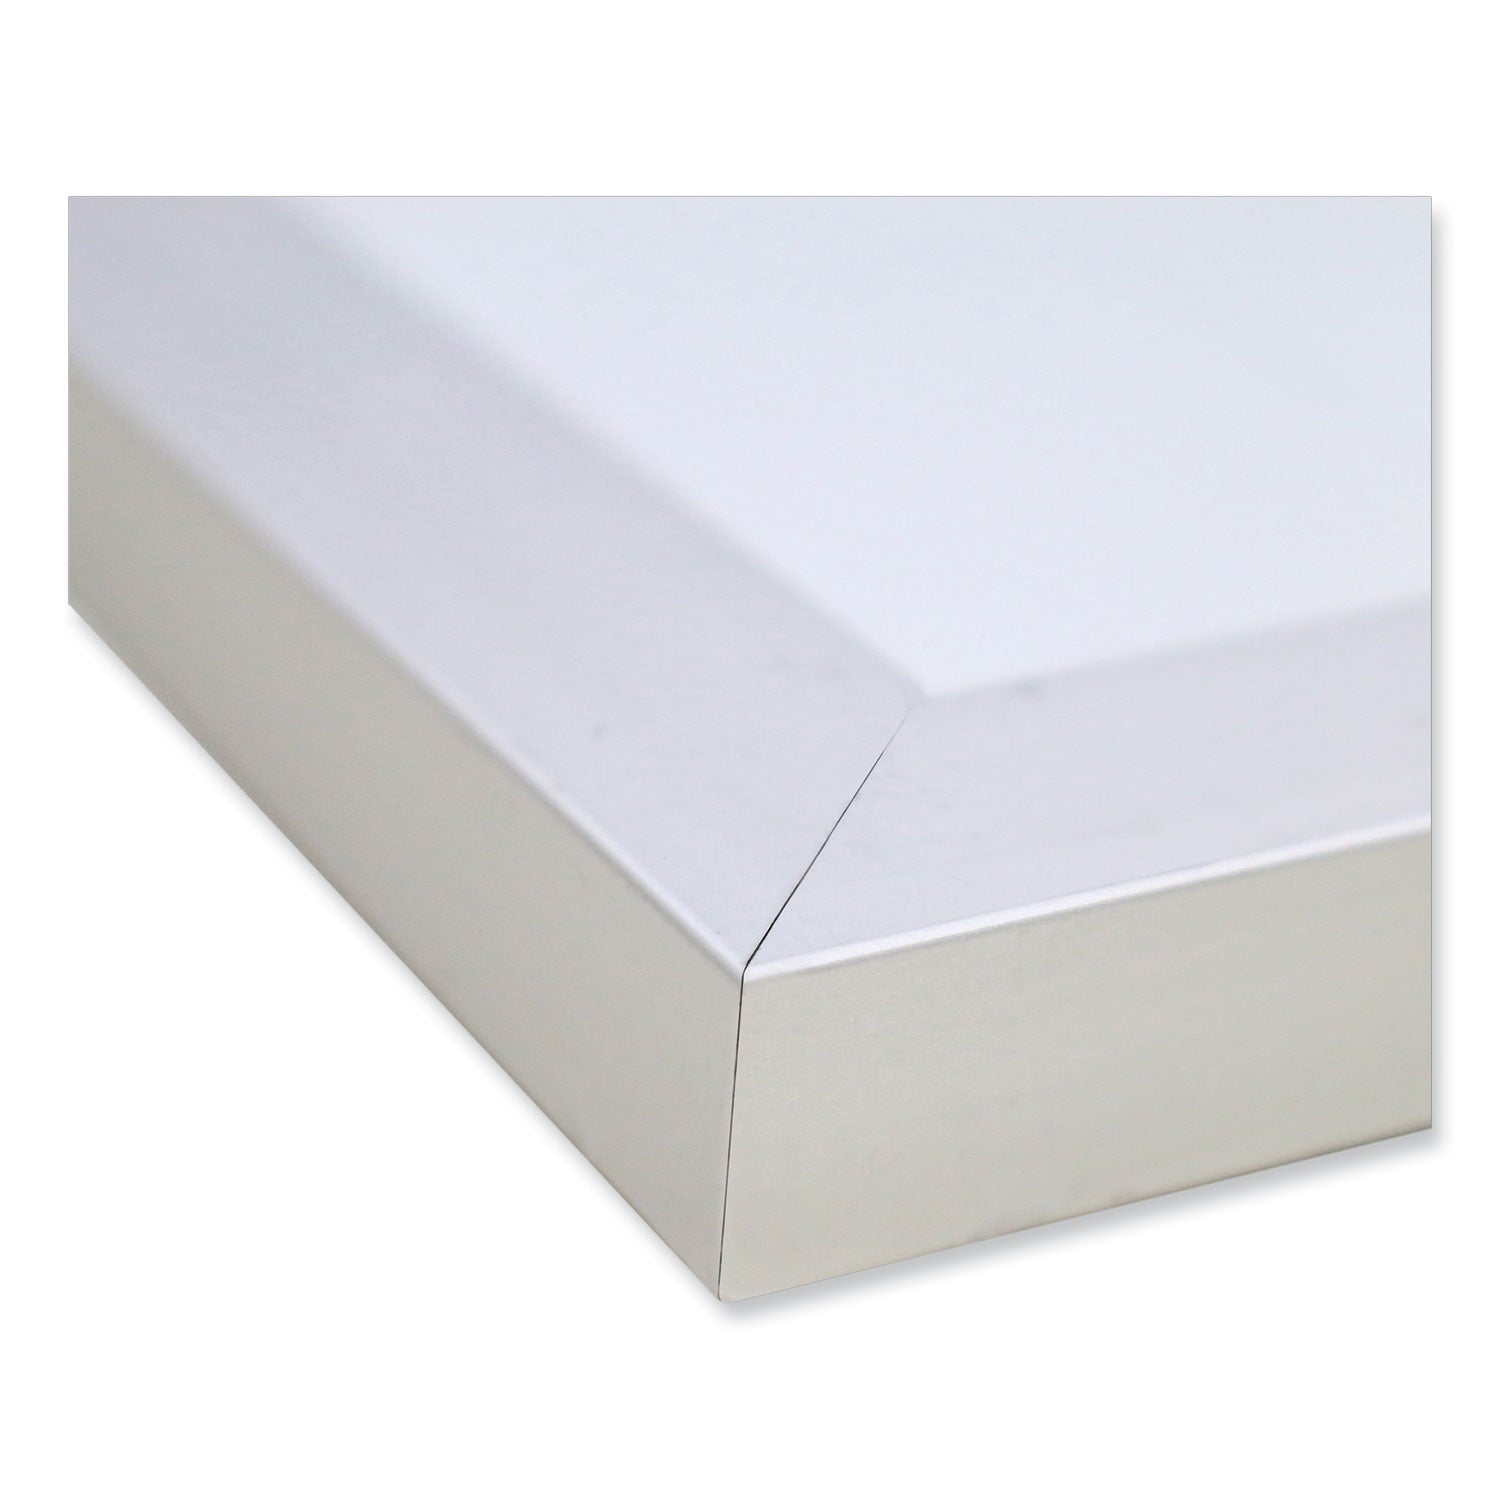 magnetic-porcelain-whiteboard-with-satin-aluminum-frame-1205-x-485-white-surface-ships-in-7-10-business-days_ghem14104 - 2